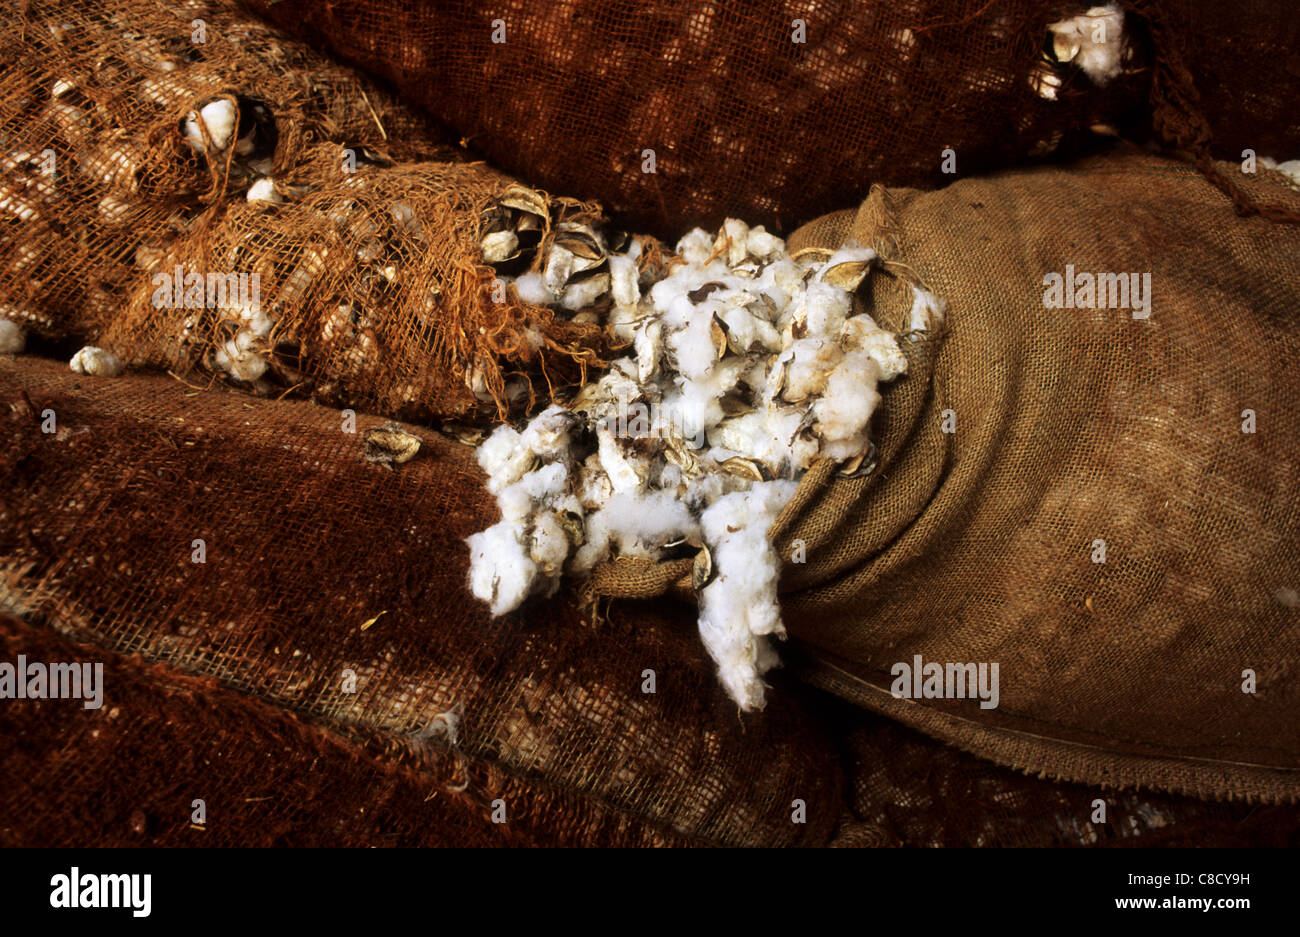 Rolandia, Parana State, Brazil. Sacks of raw cotton (Gossypium sp) with some of the cotton showing. Stock Photo